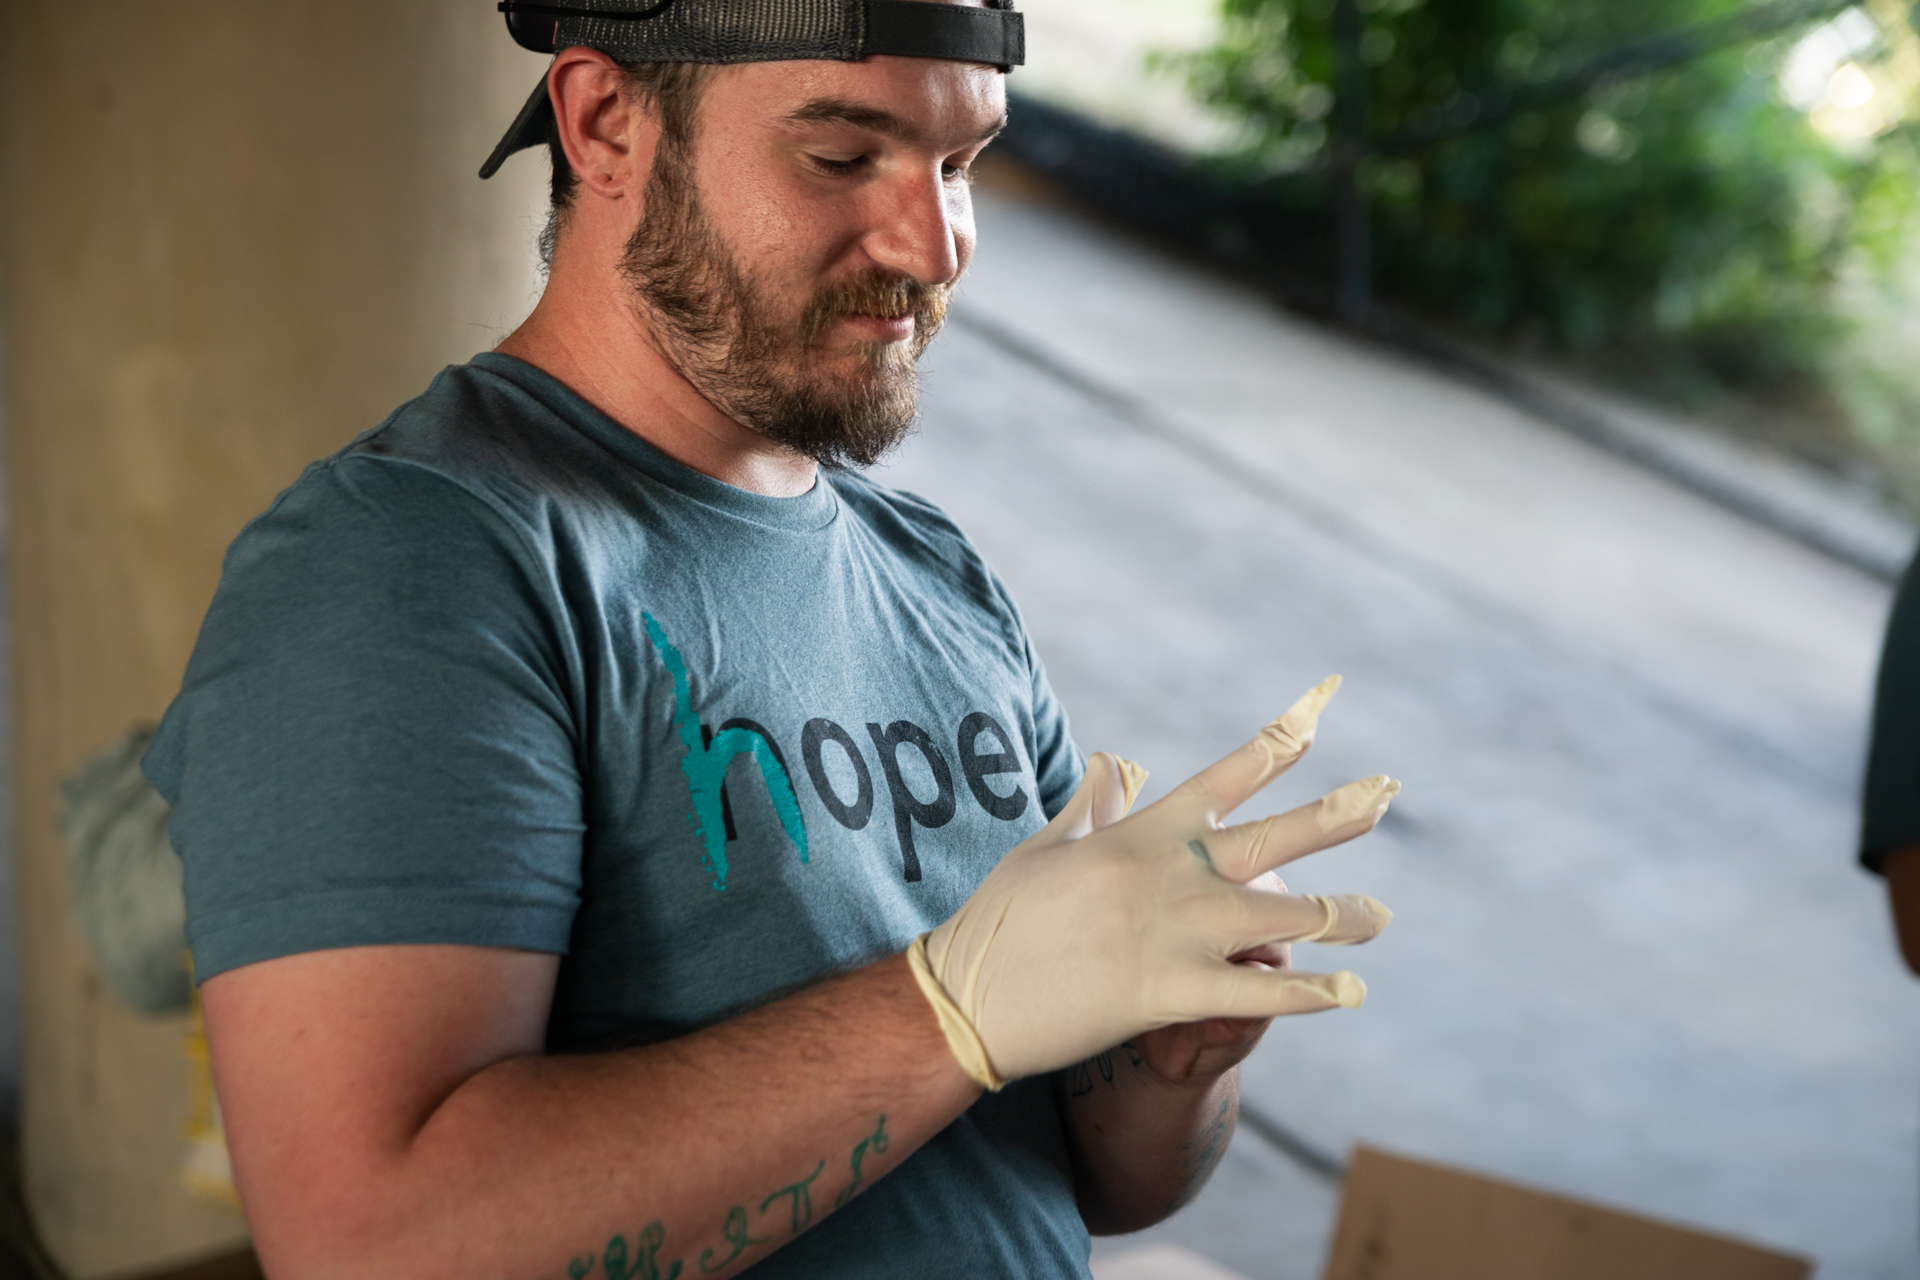 A member of the Sanga community putting on rubber gloves while volunteering at a community event.